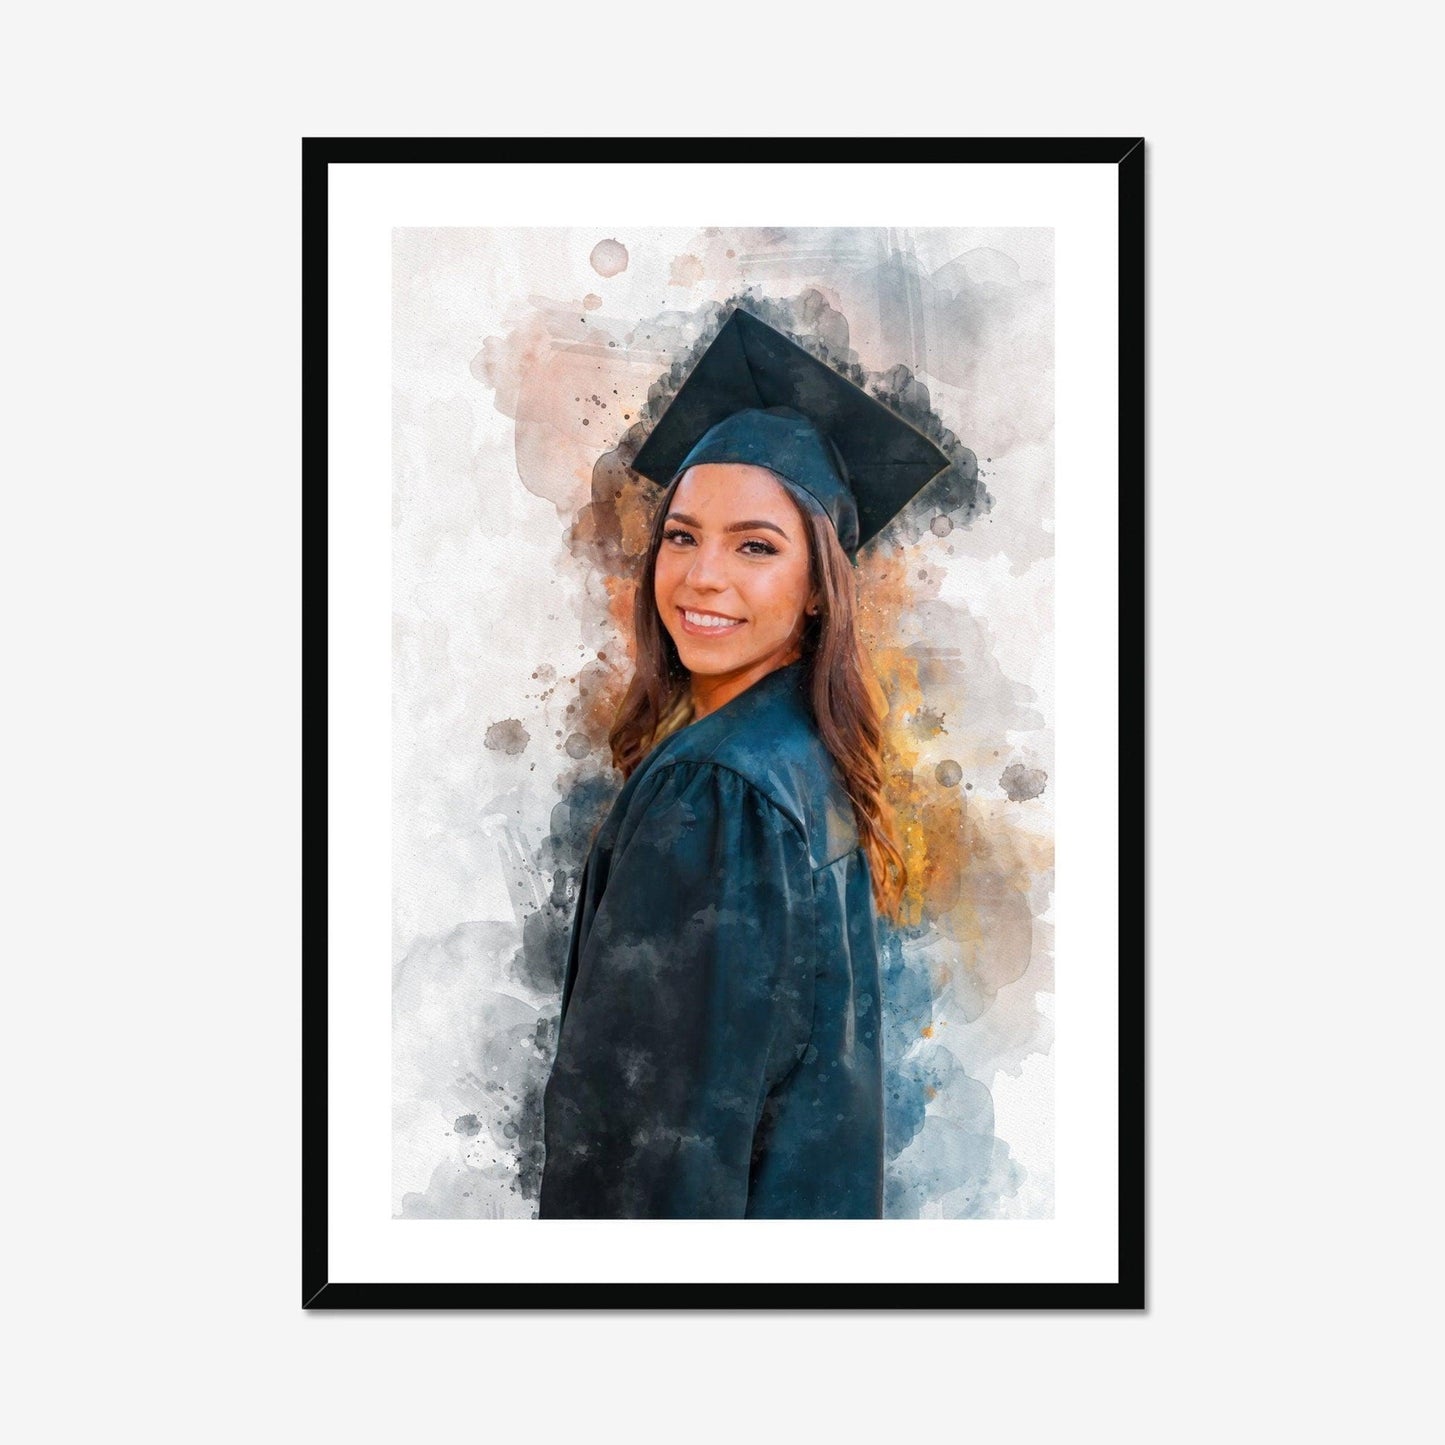 personalised gifts for graduation